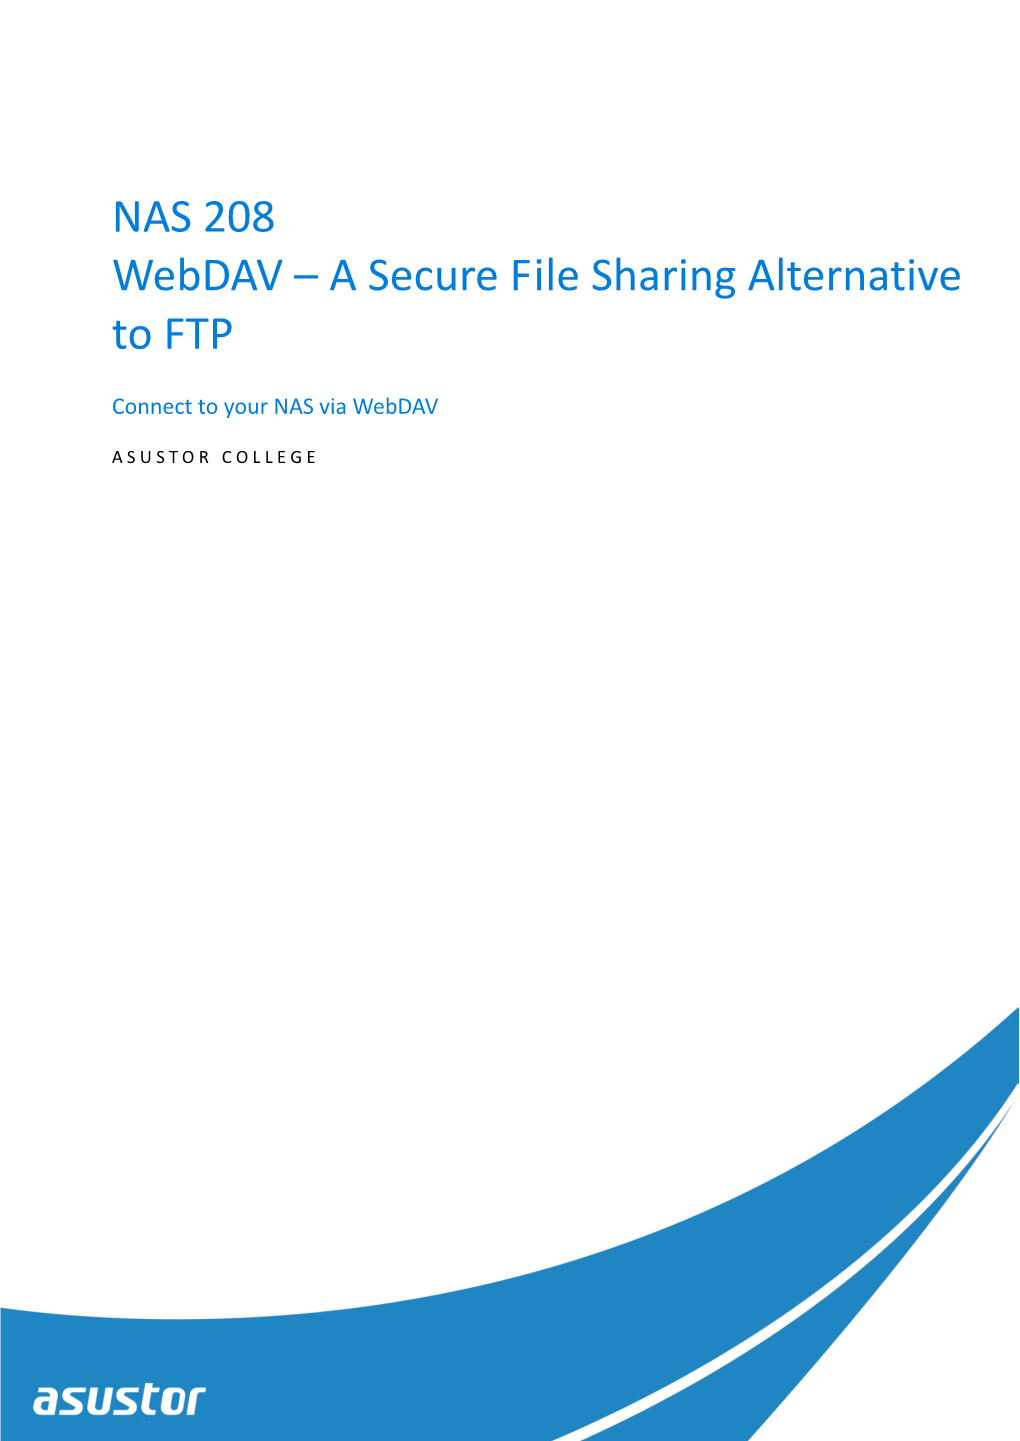 NAS 208 Webdav – a Secure File Sharing Alternative to FTP